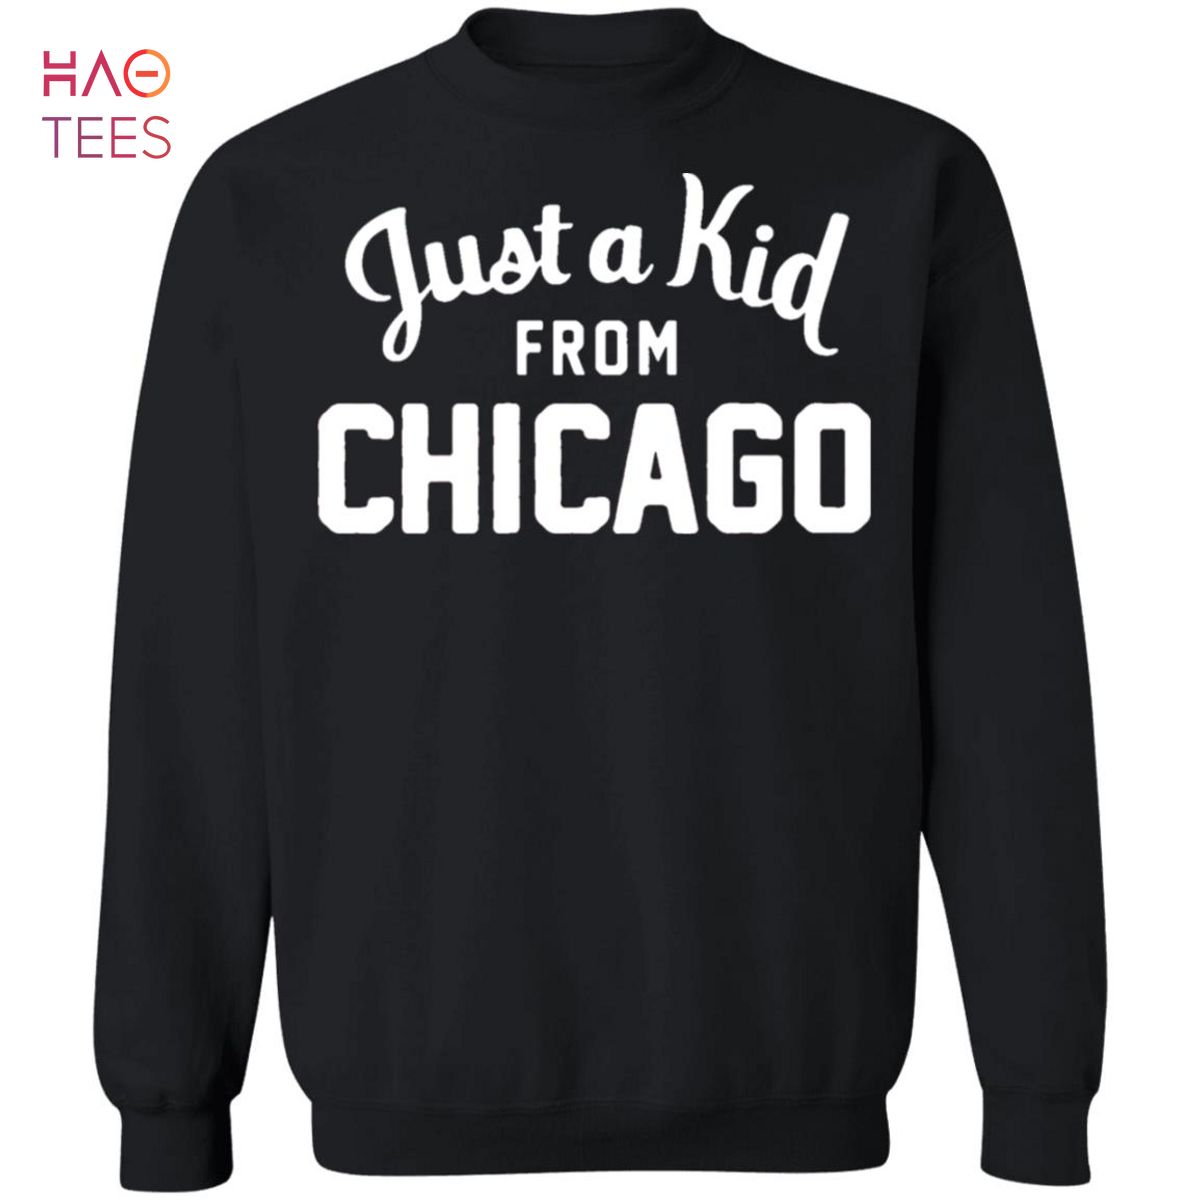 [NEW] Just A Kid From Chicago Sweater